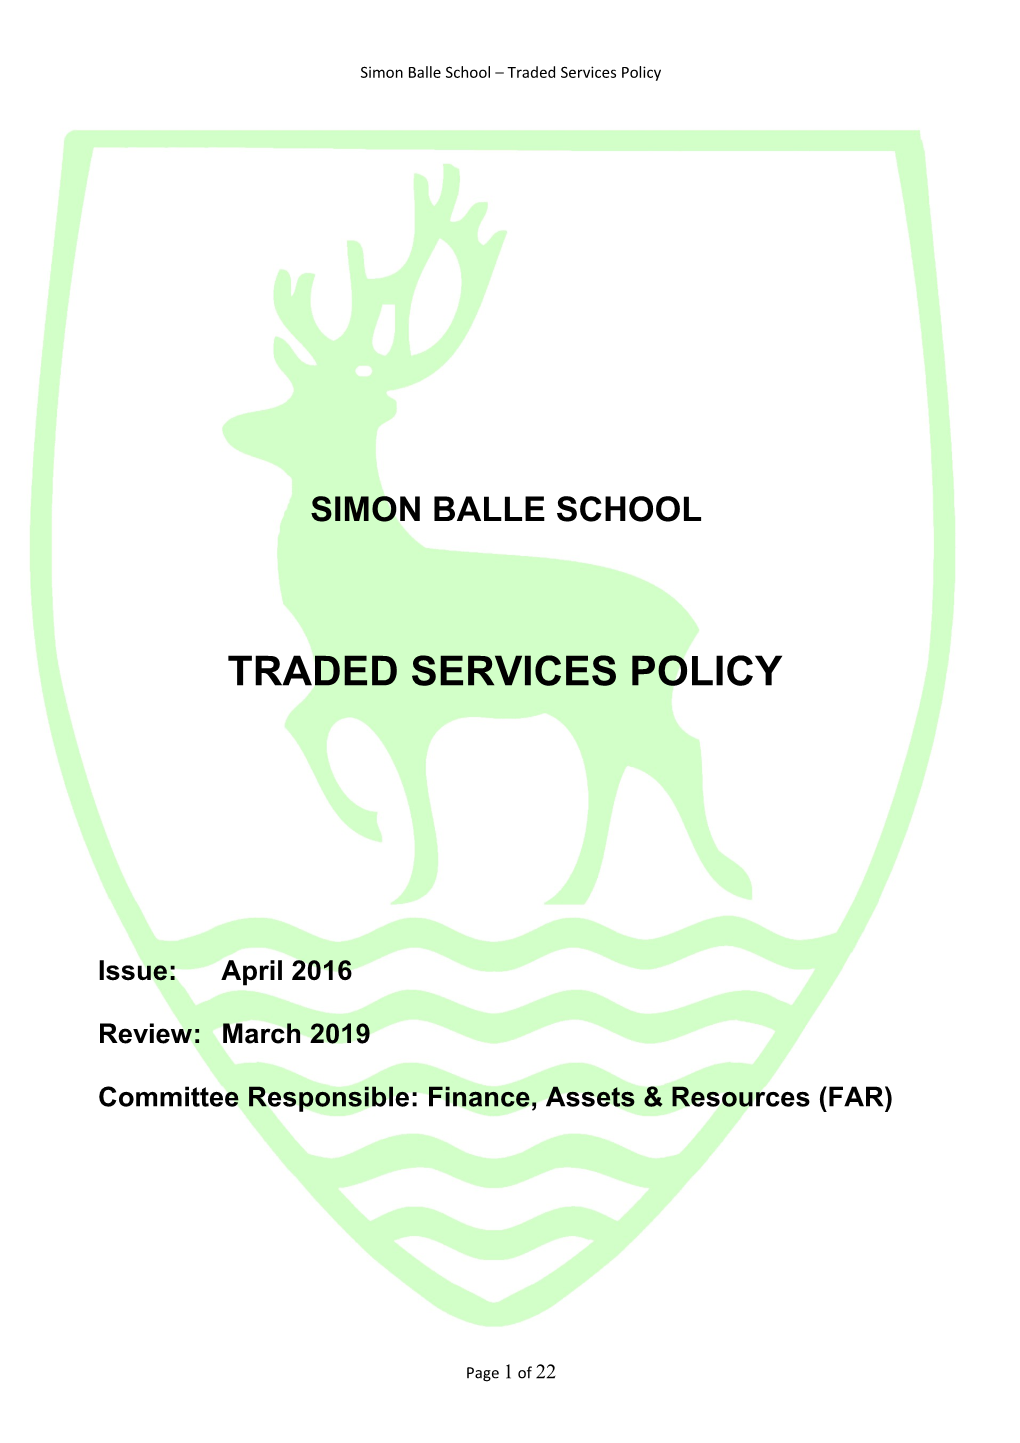 Simon Balle School Traded Services Policy